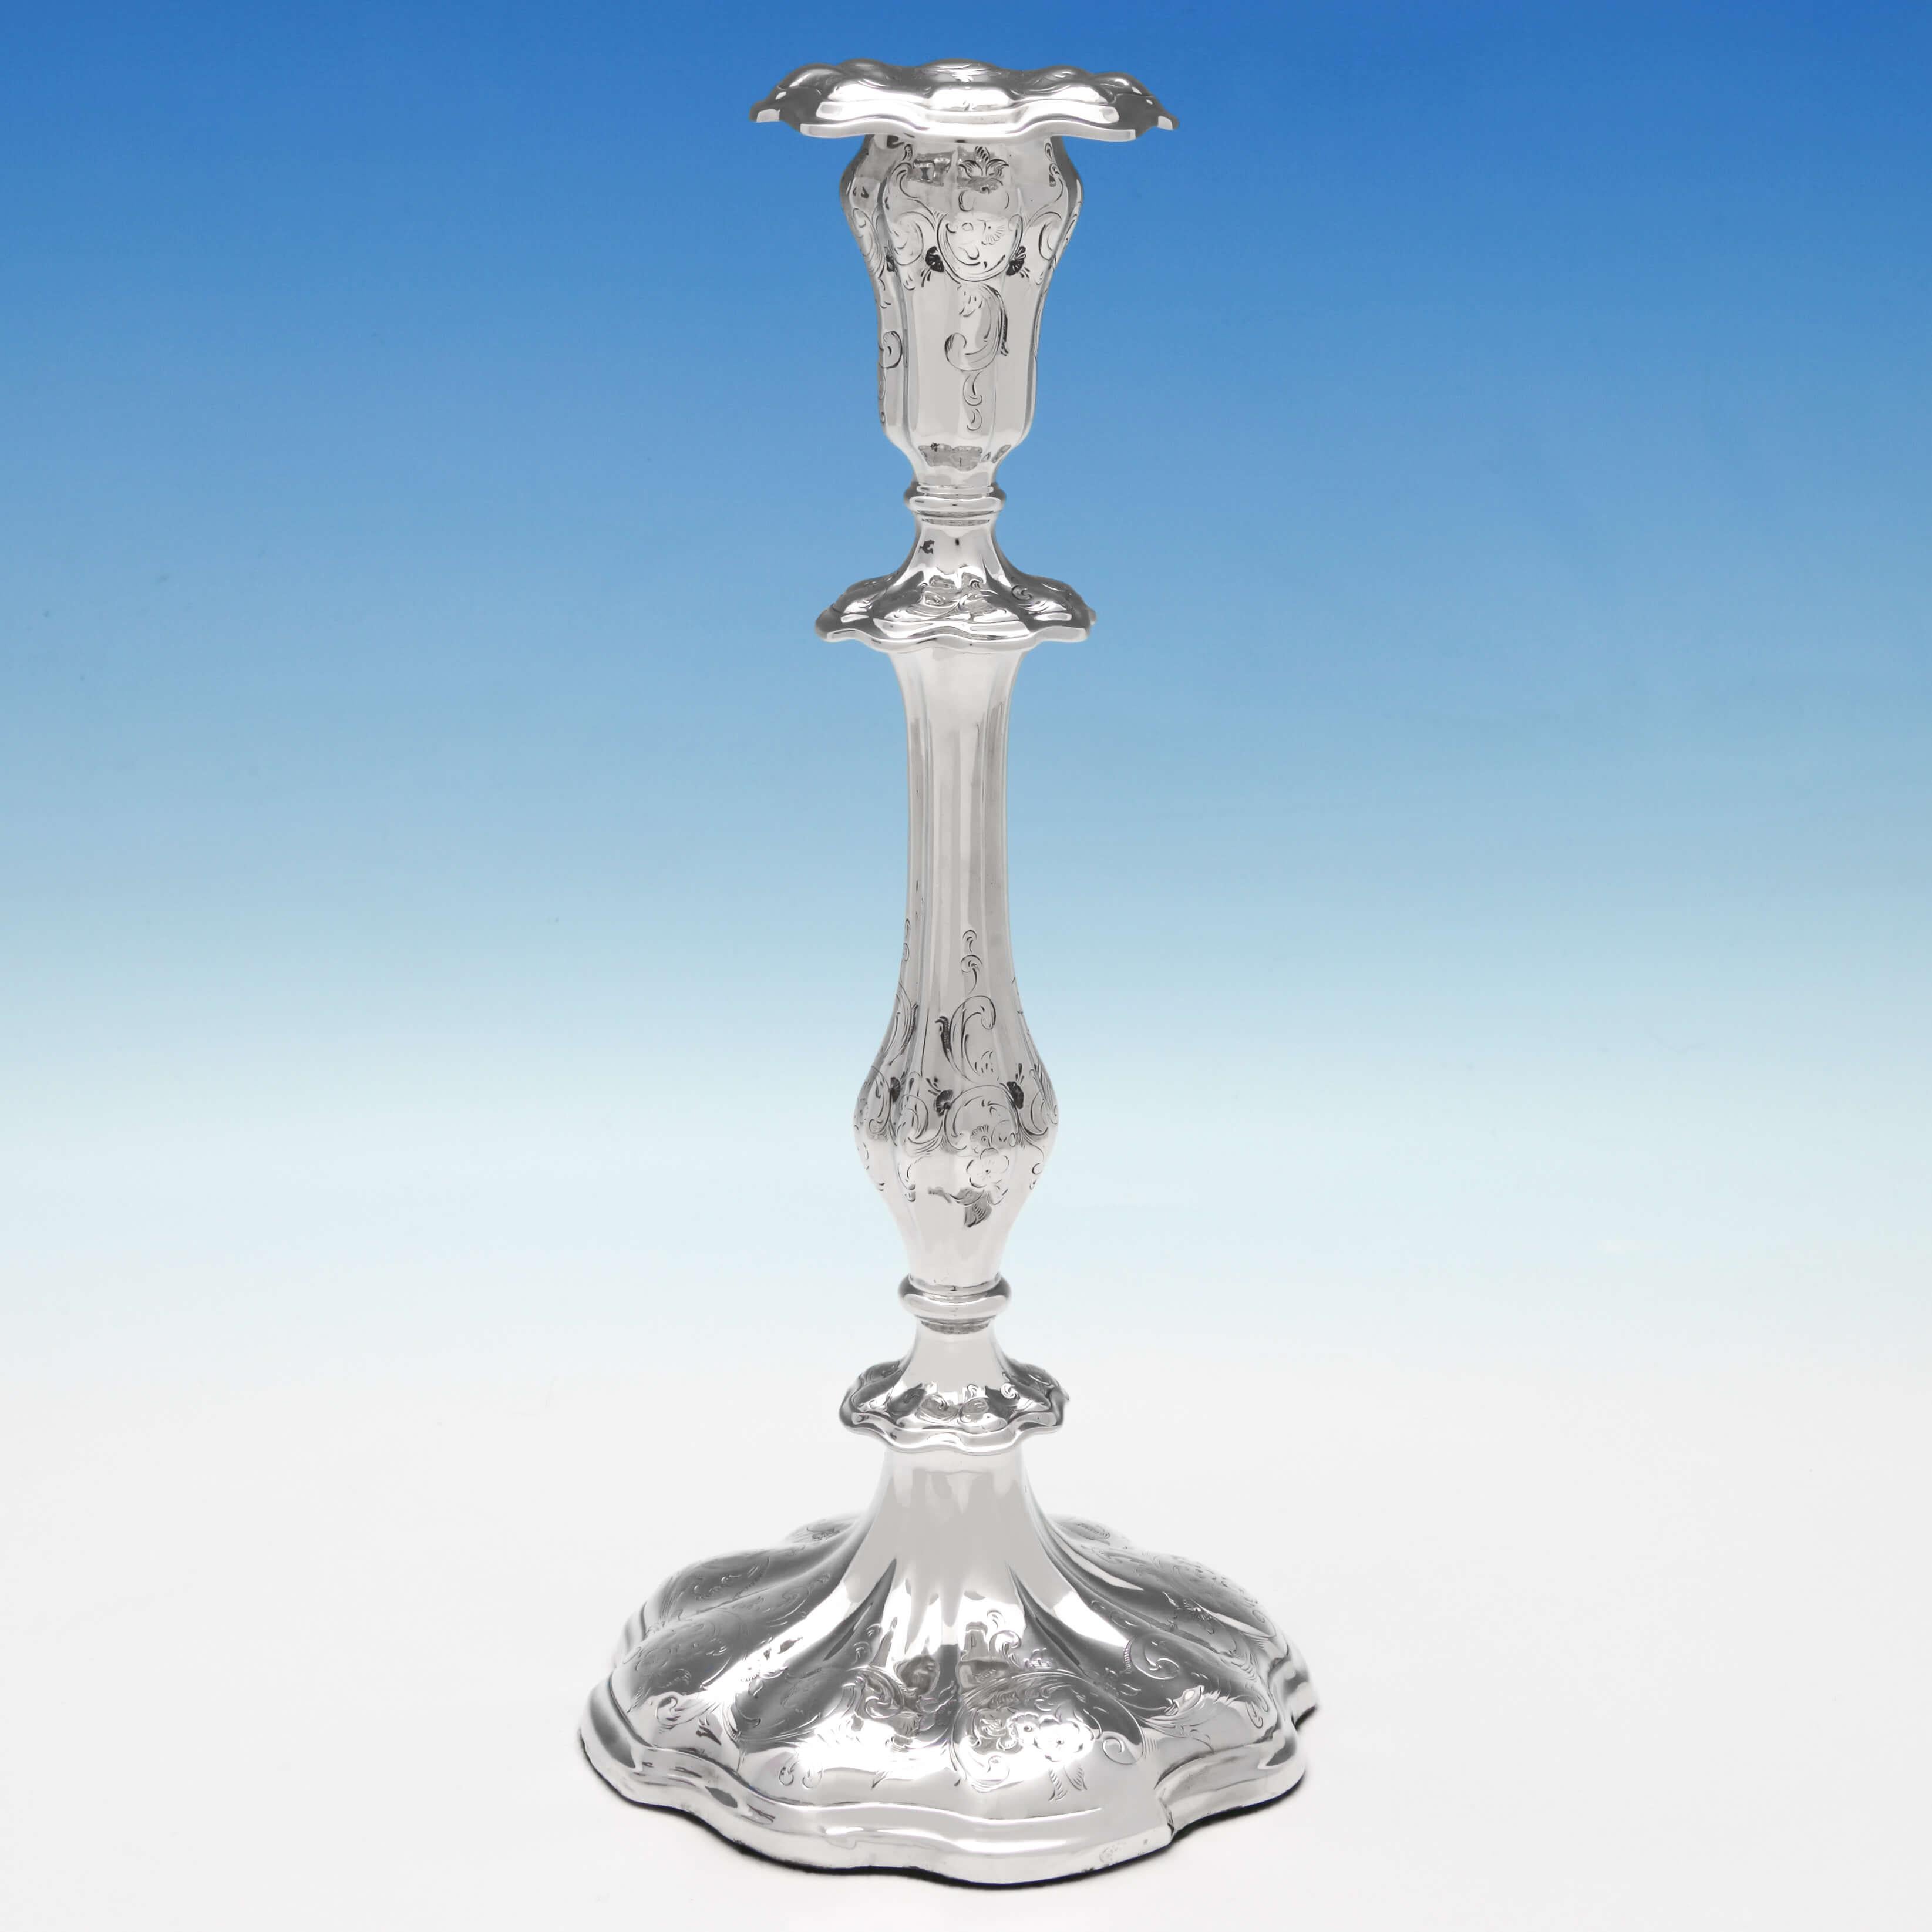 Hallmarked in Sheffield in 1846 by Waterhouse, Hatfield & Co., this attractive pair of antique, Victorian, sterling silver candlesticks have brightcut engraved decoration on the shaped baluster columns and bases. Each candlesticks measures 11